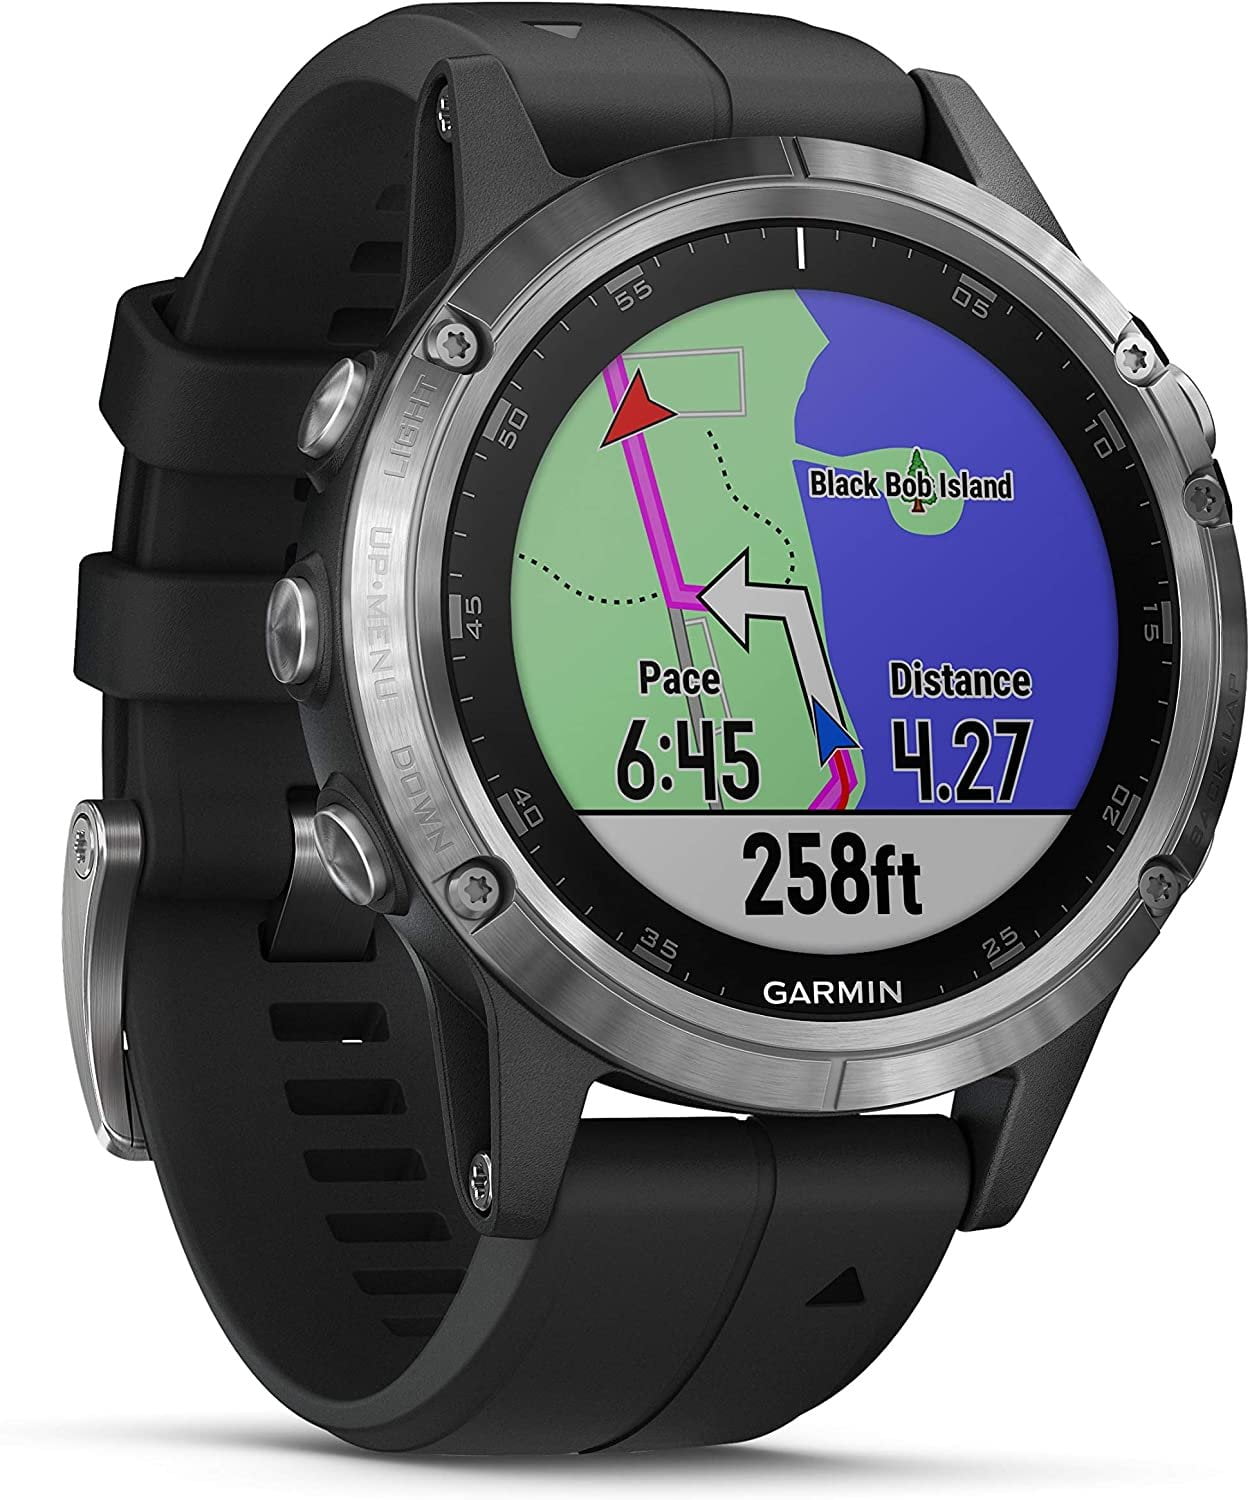 Garmin fnix 5 Plus, Premium Multisport GPS Smartwatch, Features Color Topo Maps, Heart Rate Monitoring, Music and Pay, Black/Silver, Europe Walmart.com